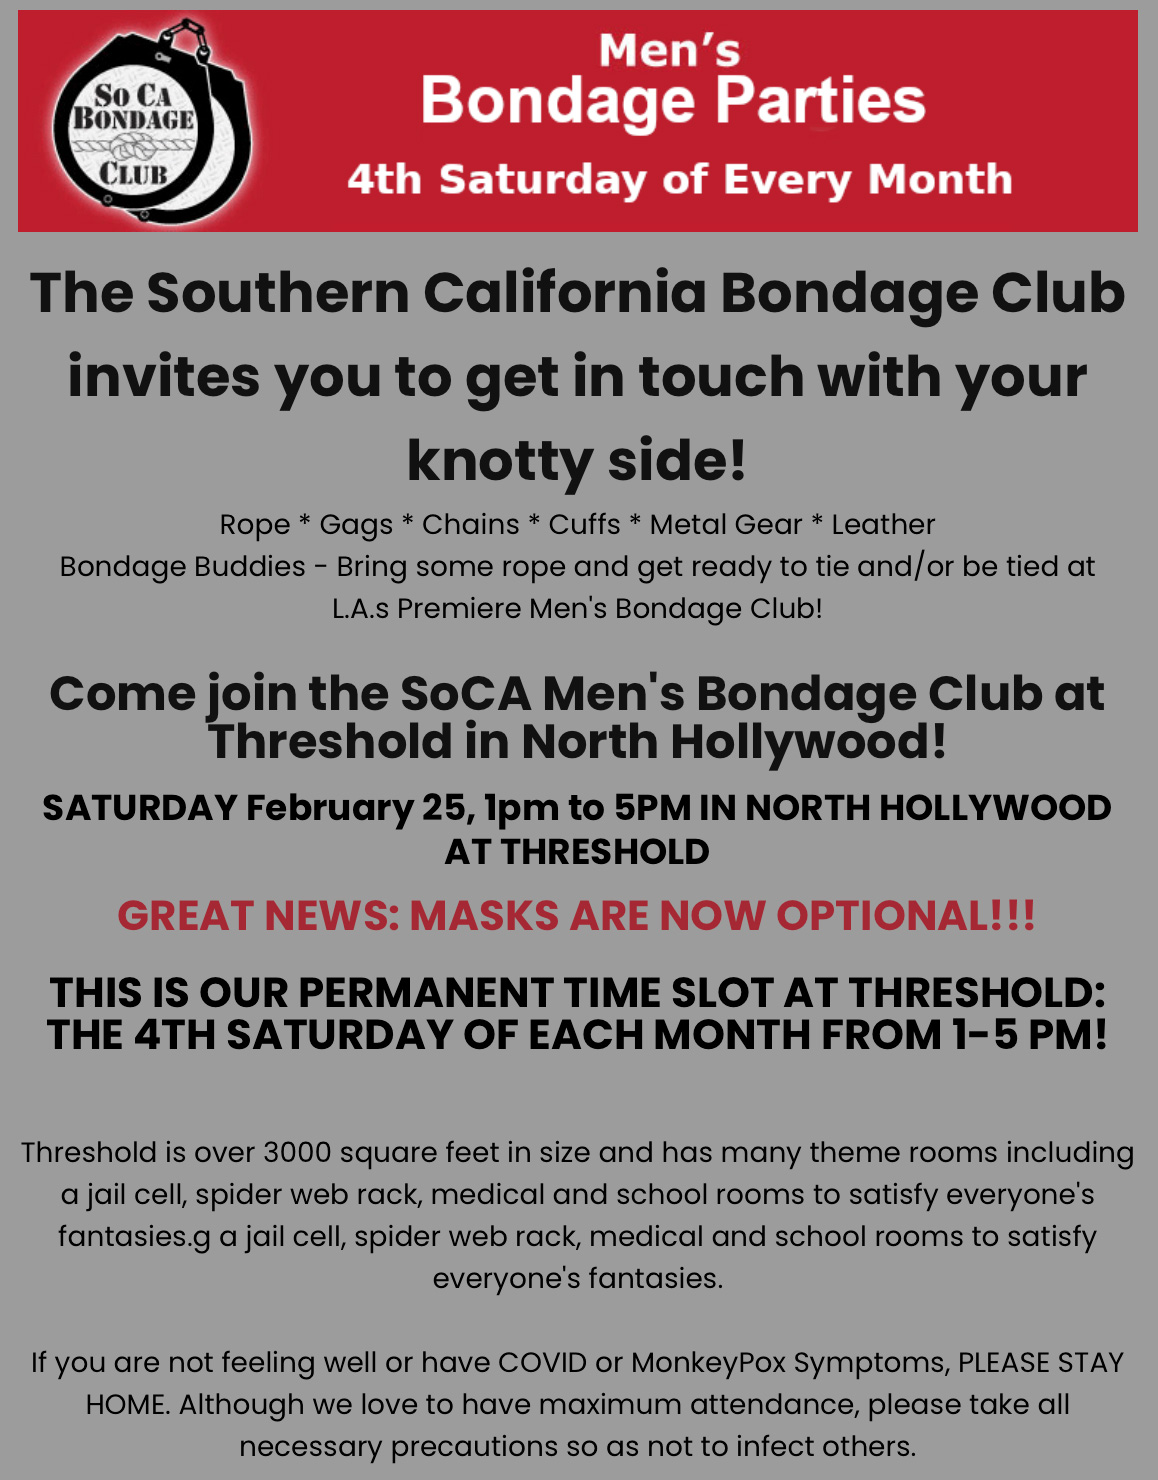 Southern California Bondage Club play parties for men